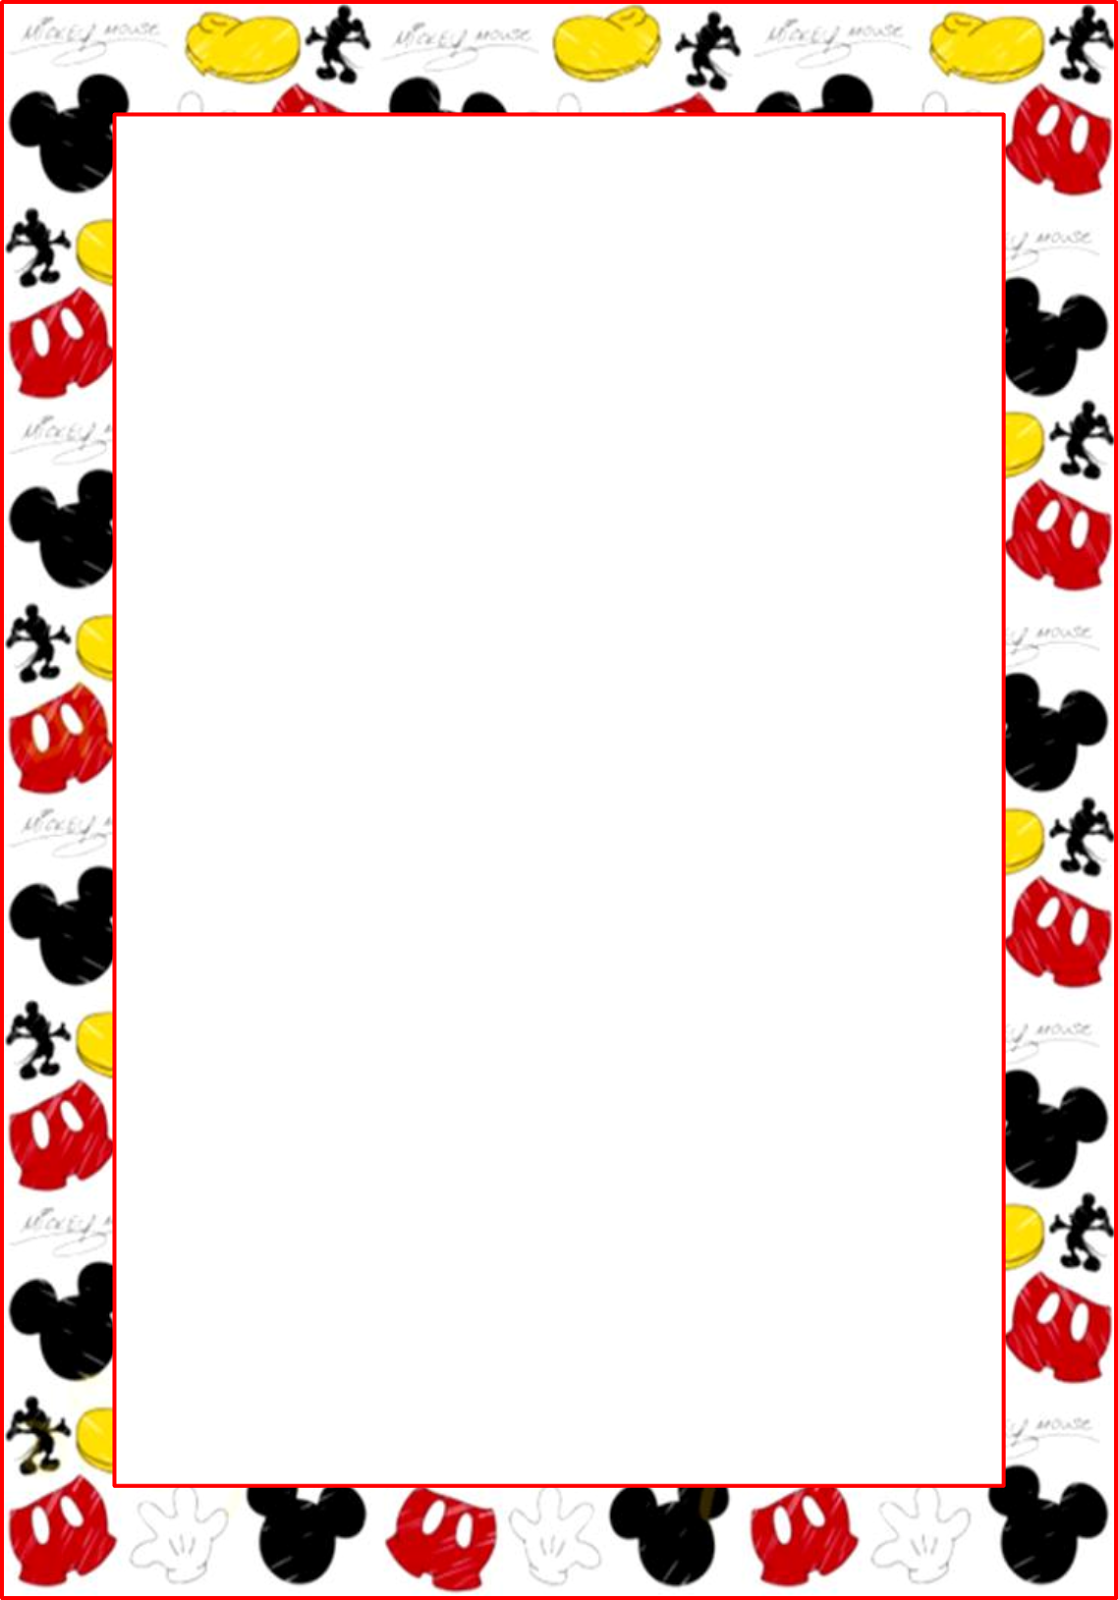 Mickey Mouse Border Clipart Free download on ClipArtMag